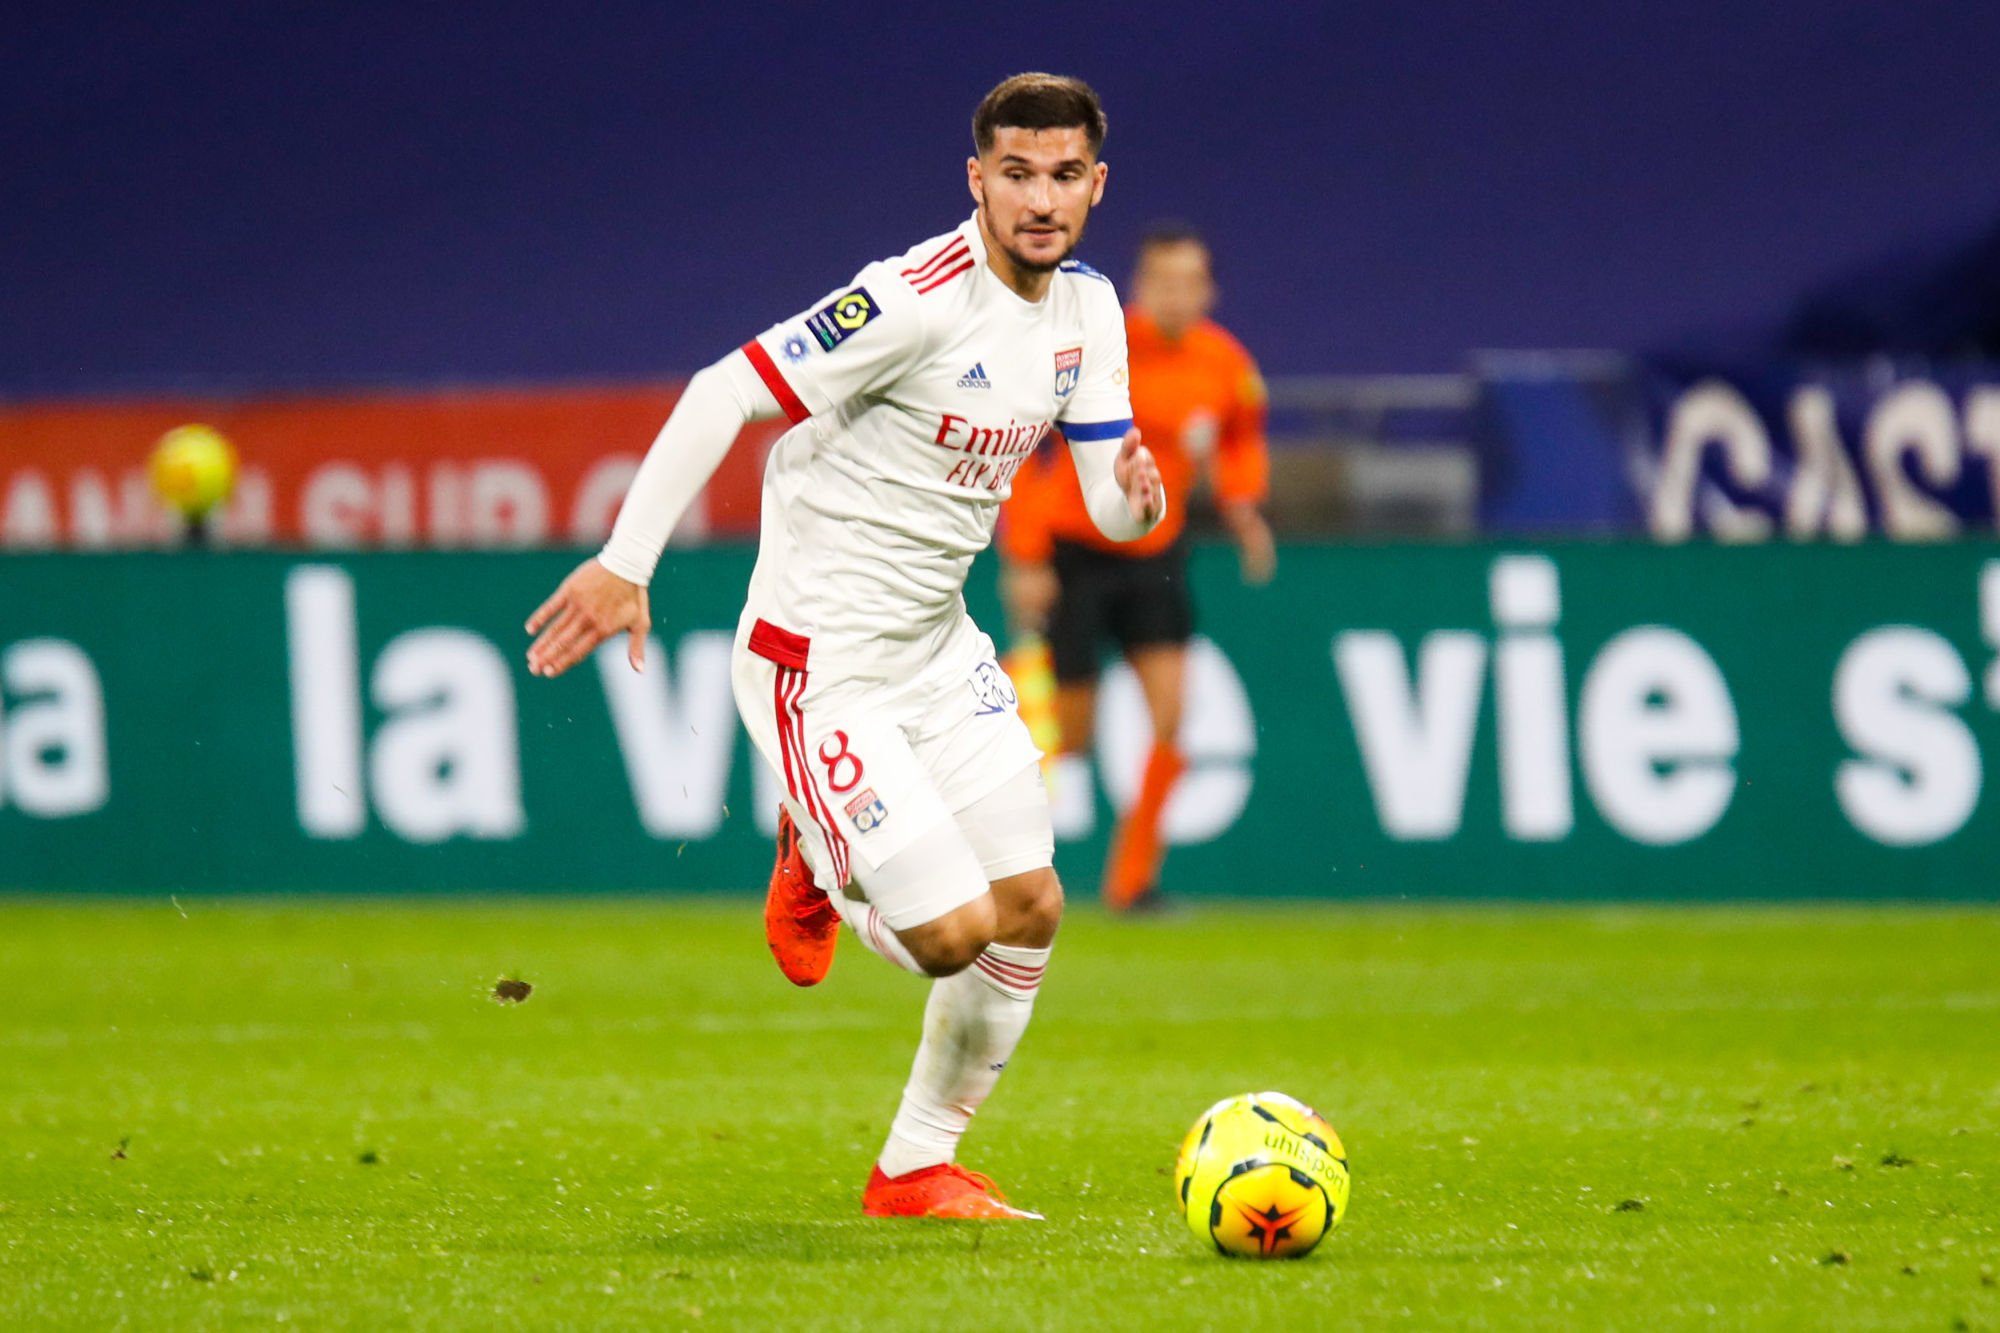 OL: Uneasiness, the behavior deemed racist by Lyon supporters against Aouar